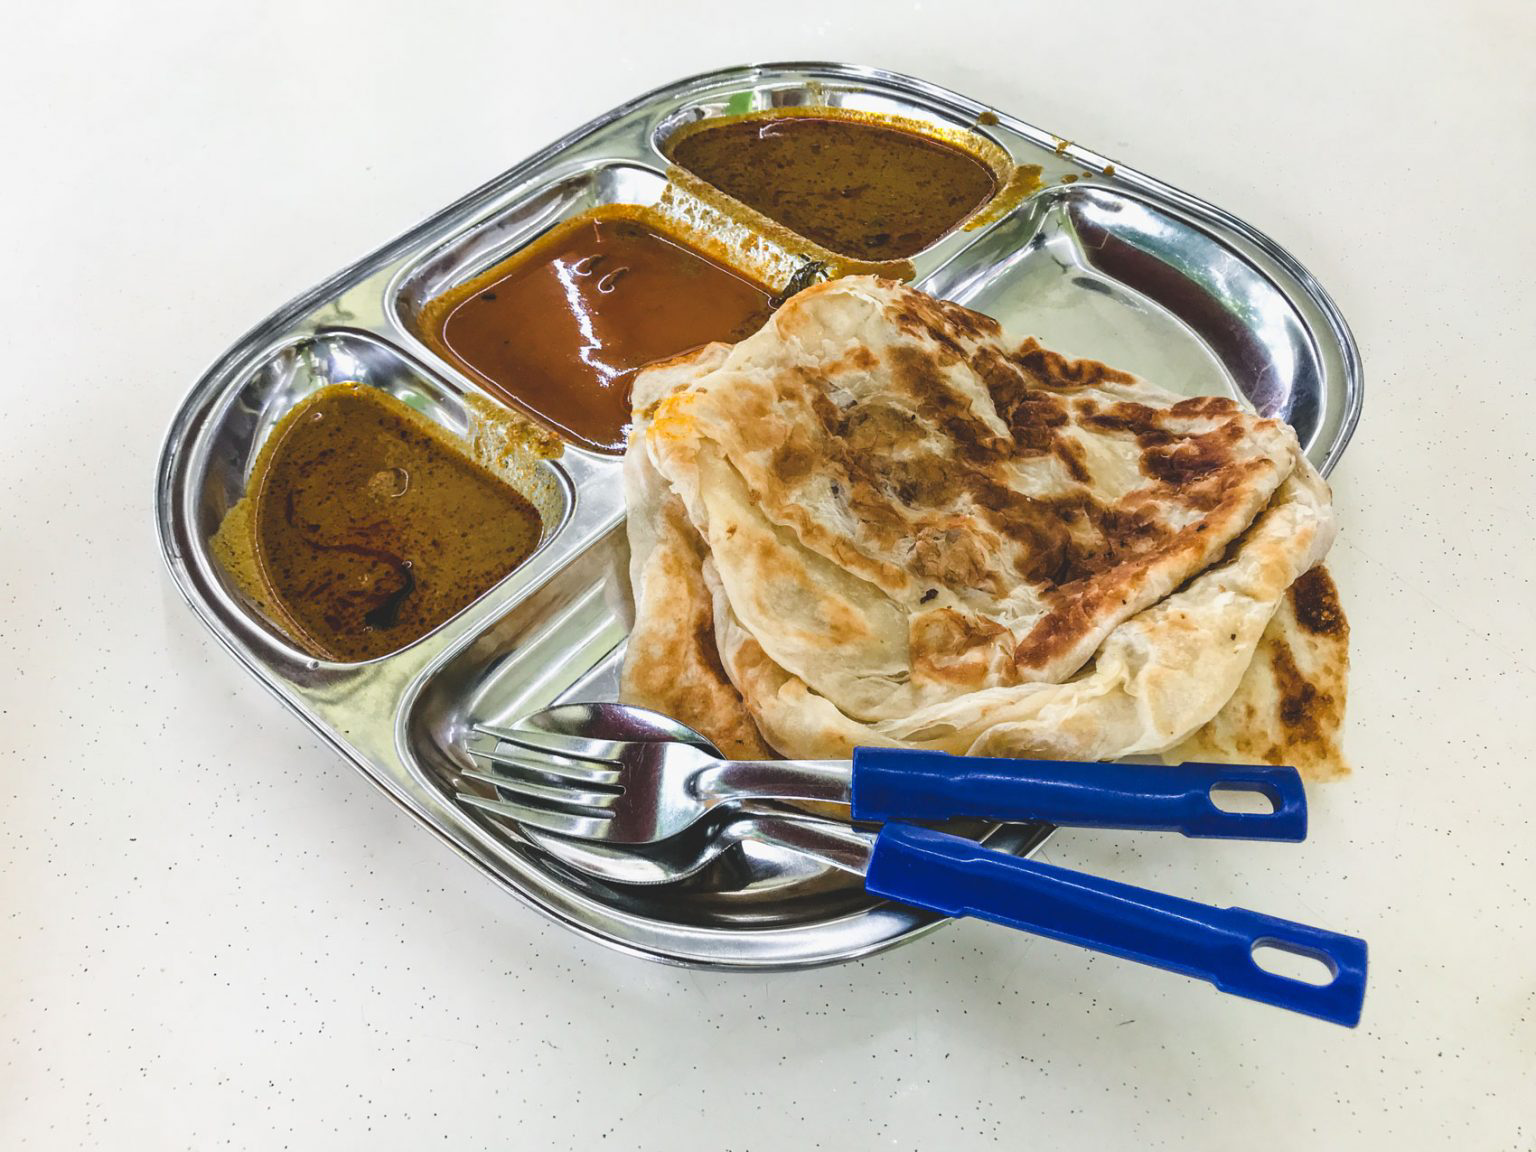 A silver tray filled with Roti John and a variety of sauces.